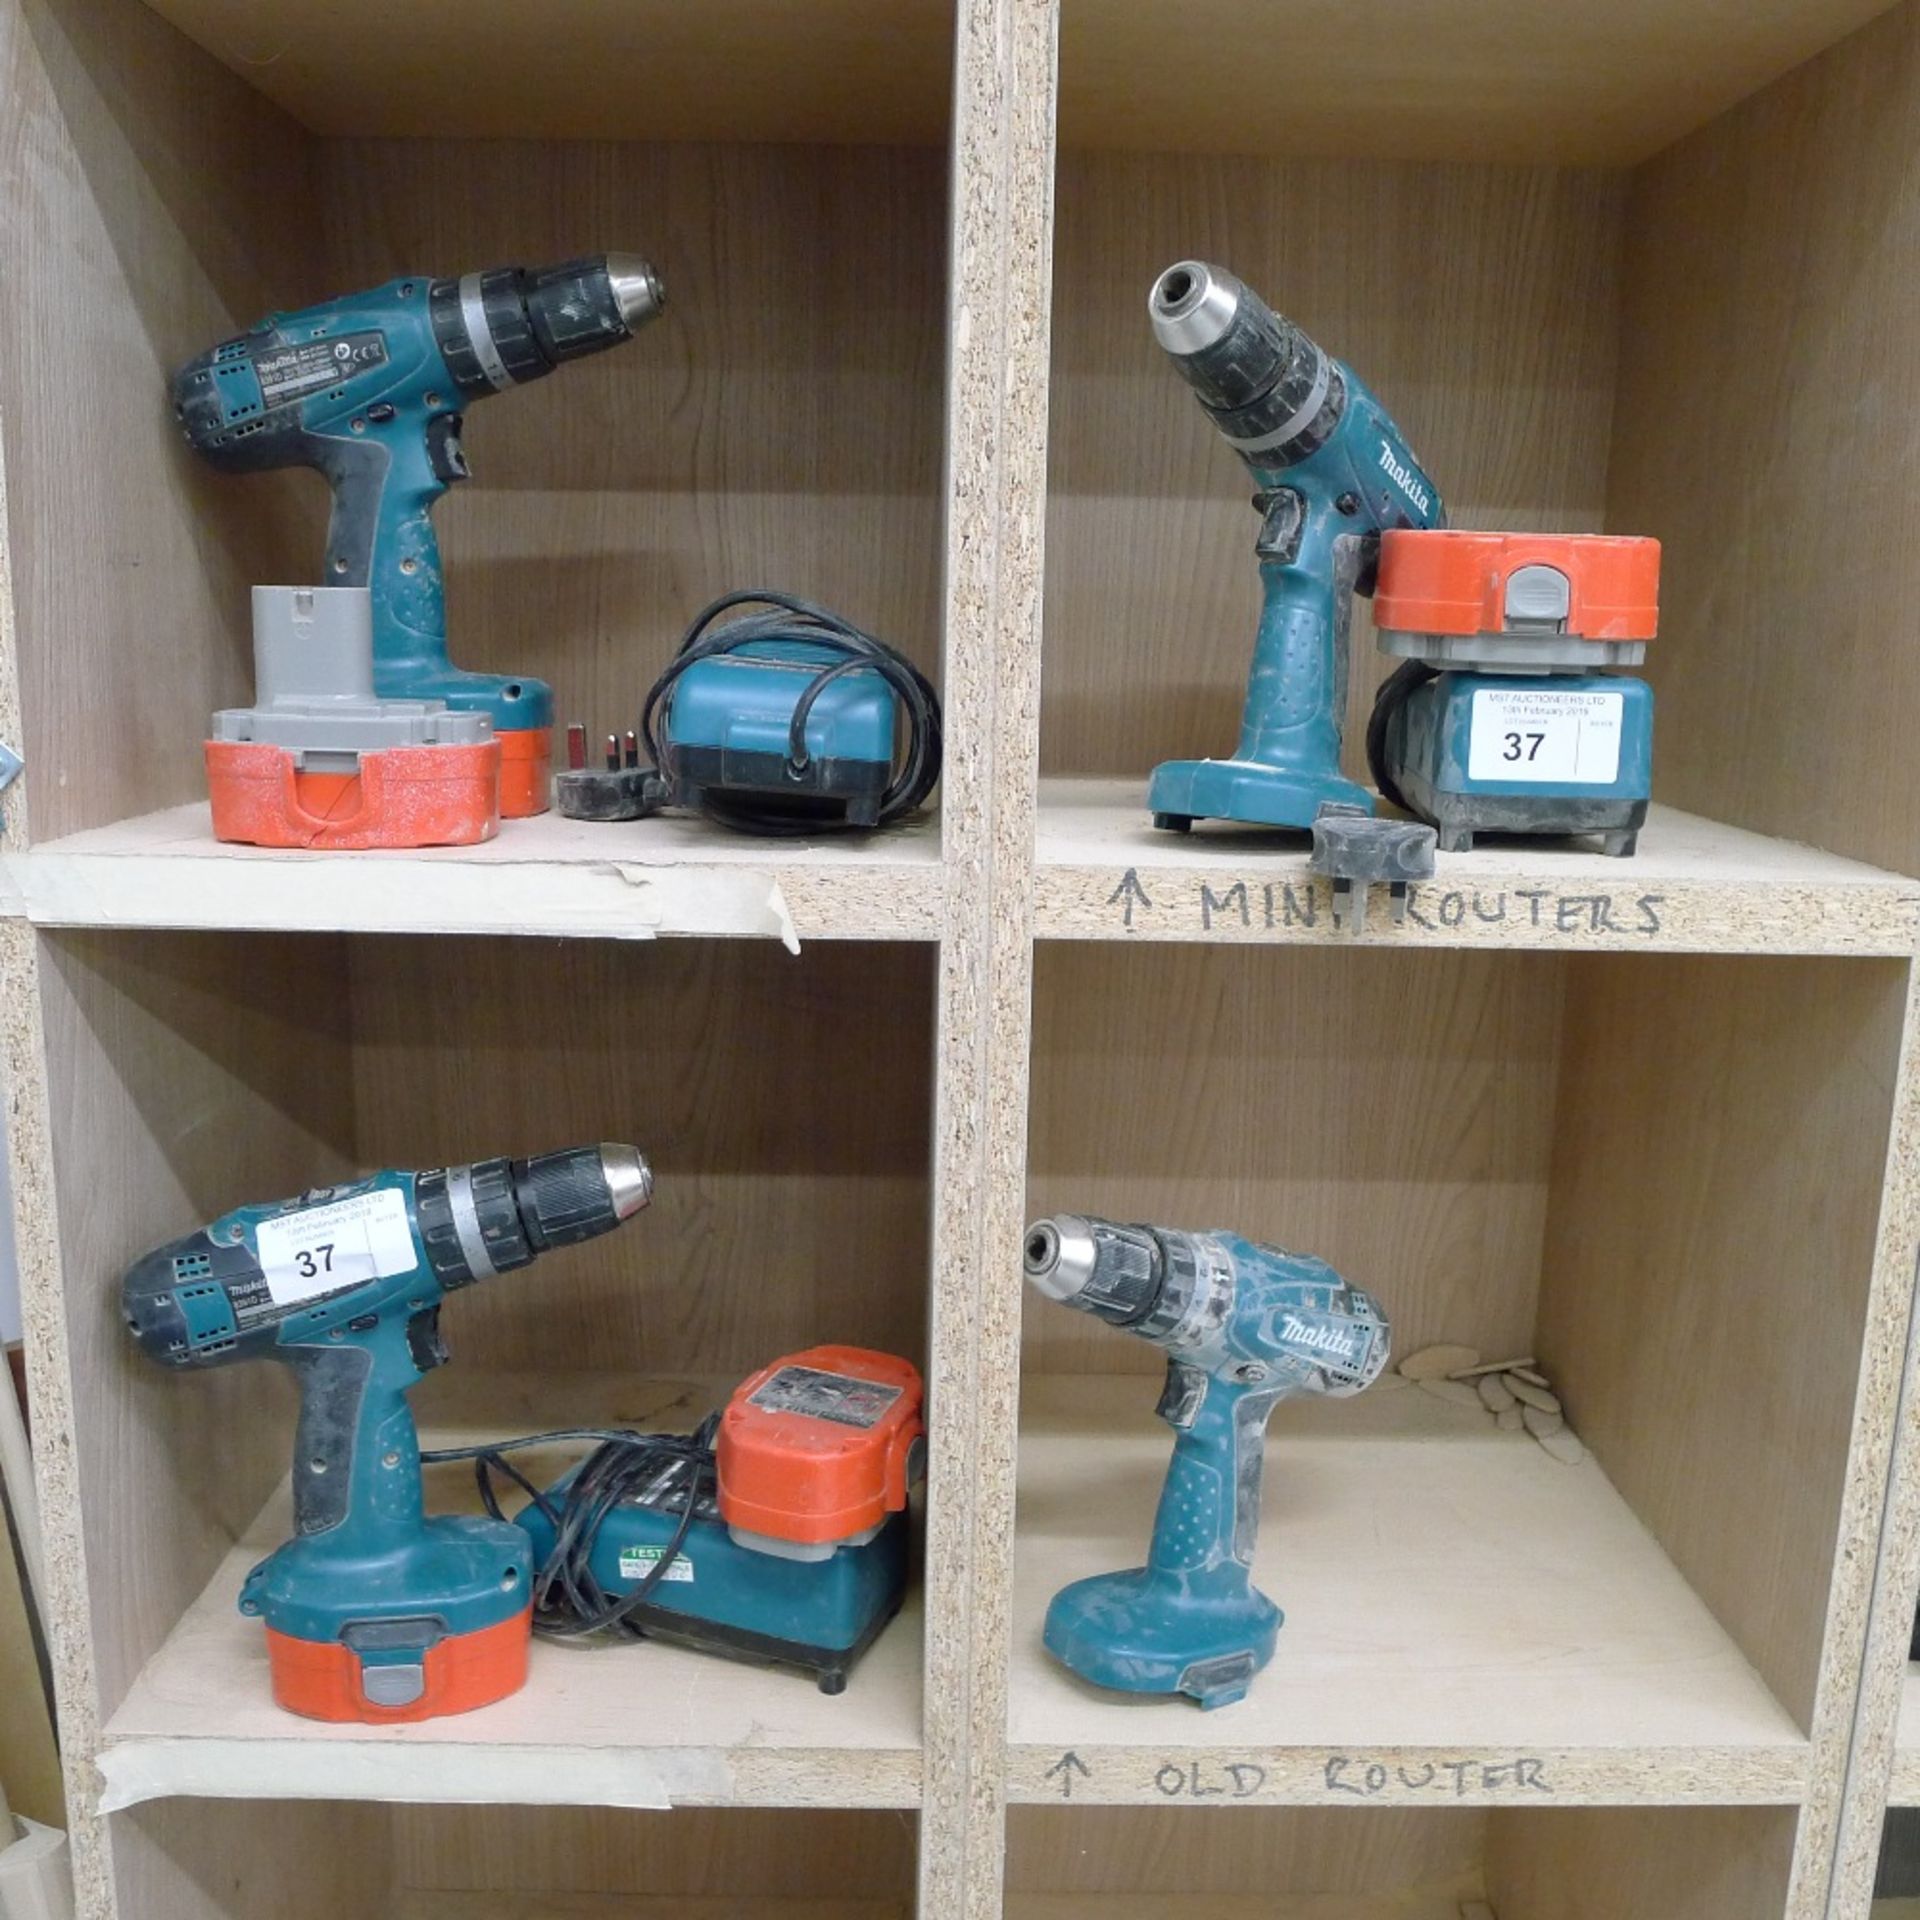 4 various Makita cordless drills with 5 batteries and 3 chargers